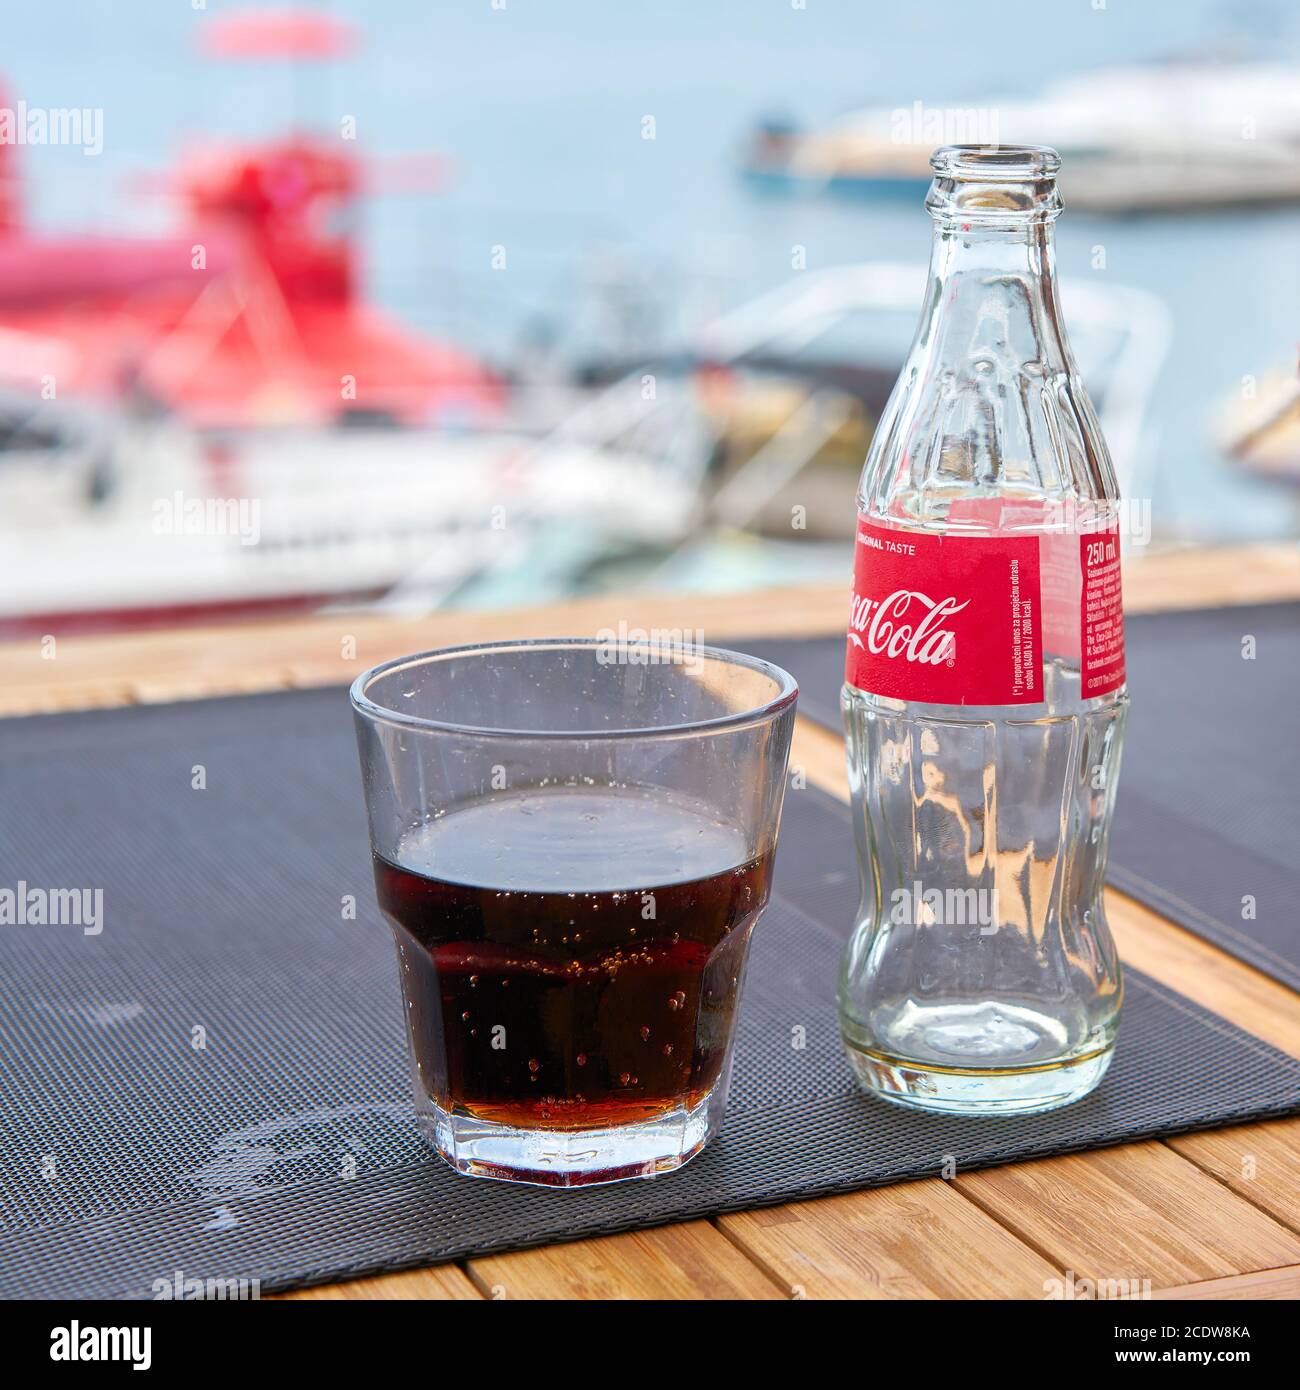 Coca-Cola bottle and a glass on the table of a beach bar of the city Vrsar in Croatia Stock Photo